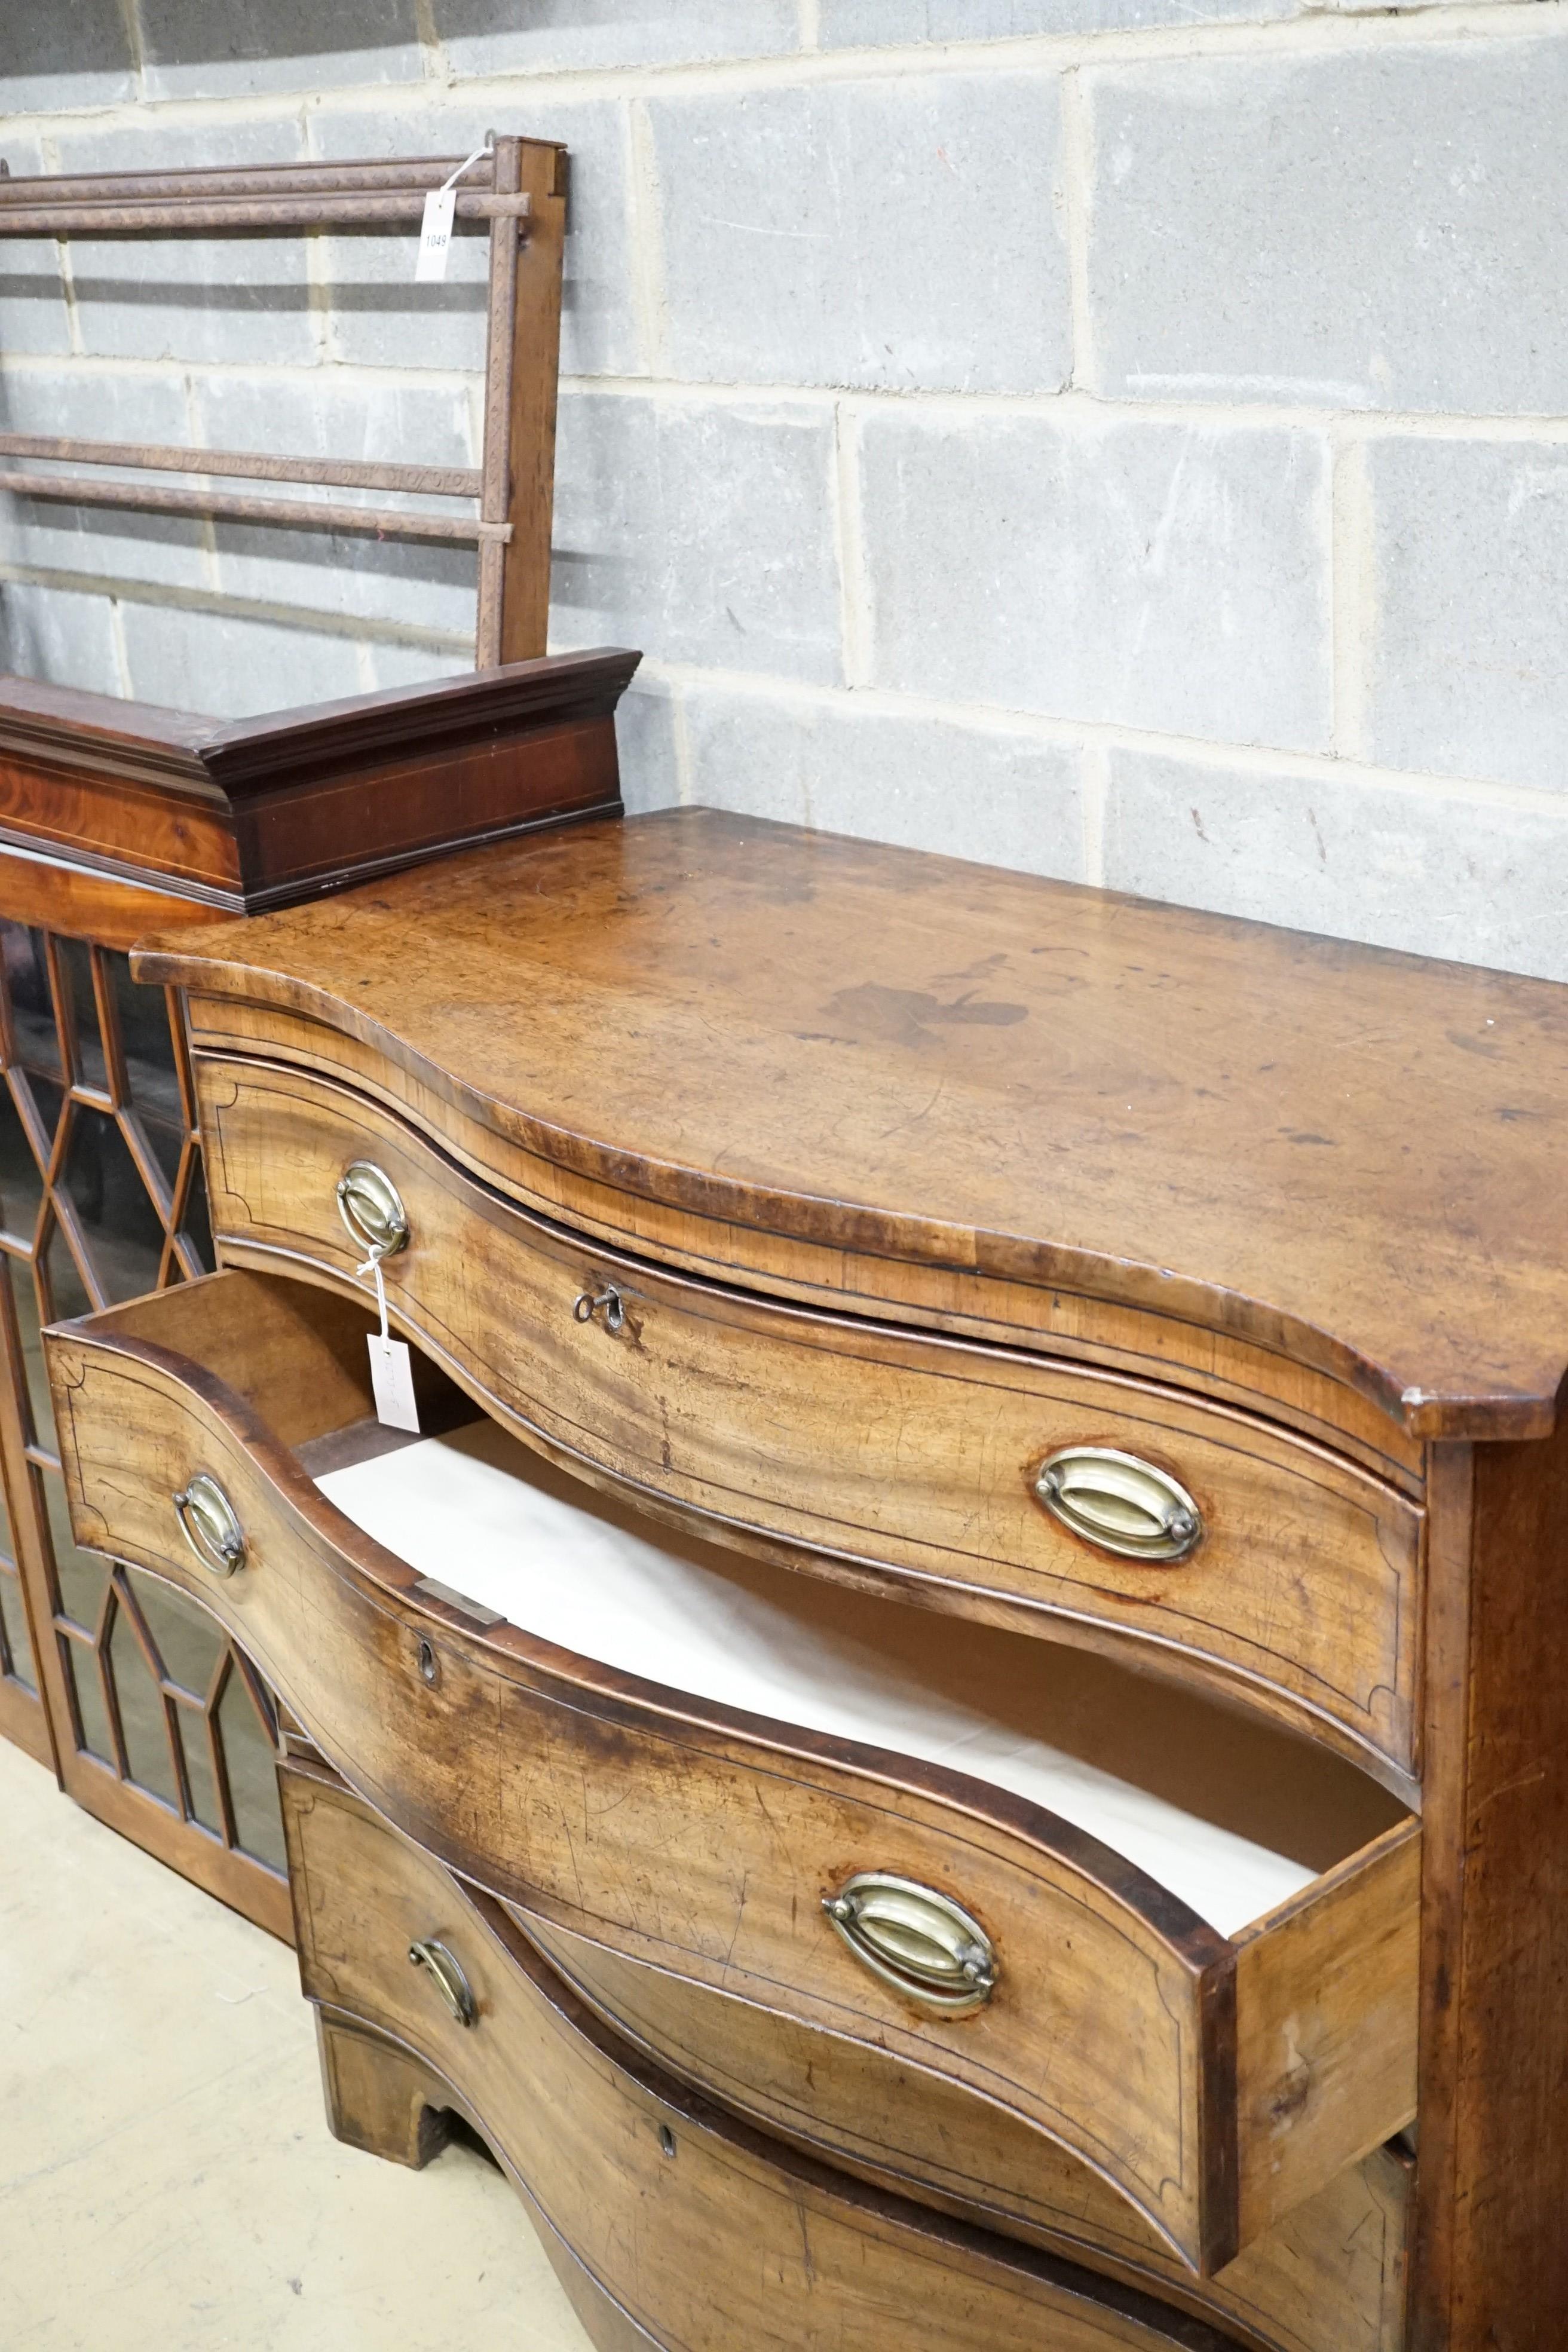 A George III mahogany serpentine chest with ebony stringing and four graduated long drawers, the top drawer divided into three, width 120cm, height 104cm, depth 59cm